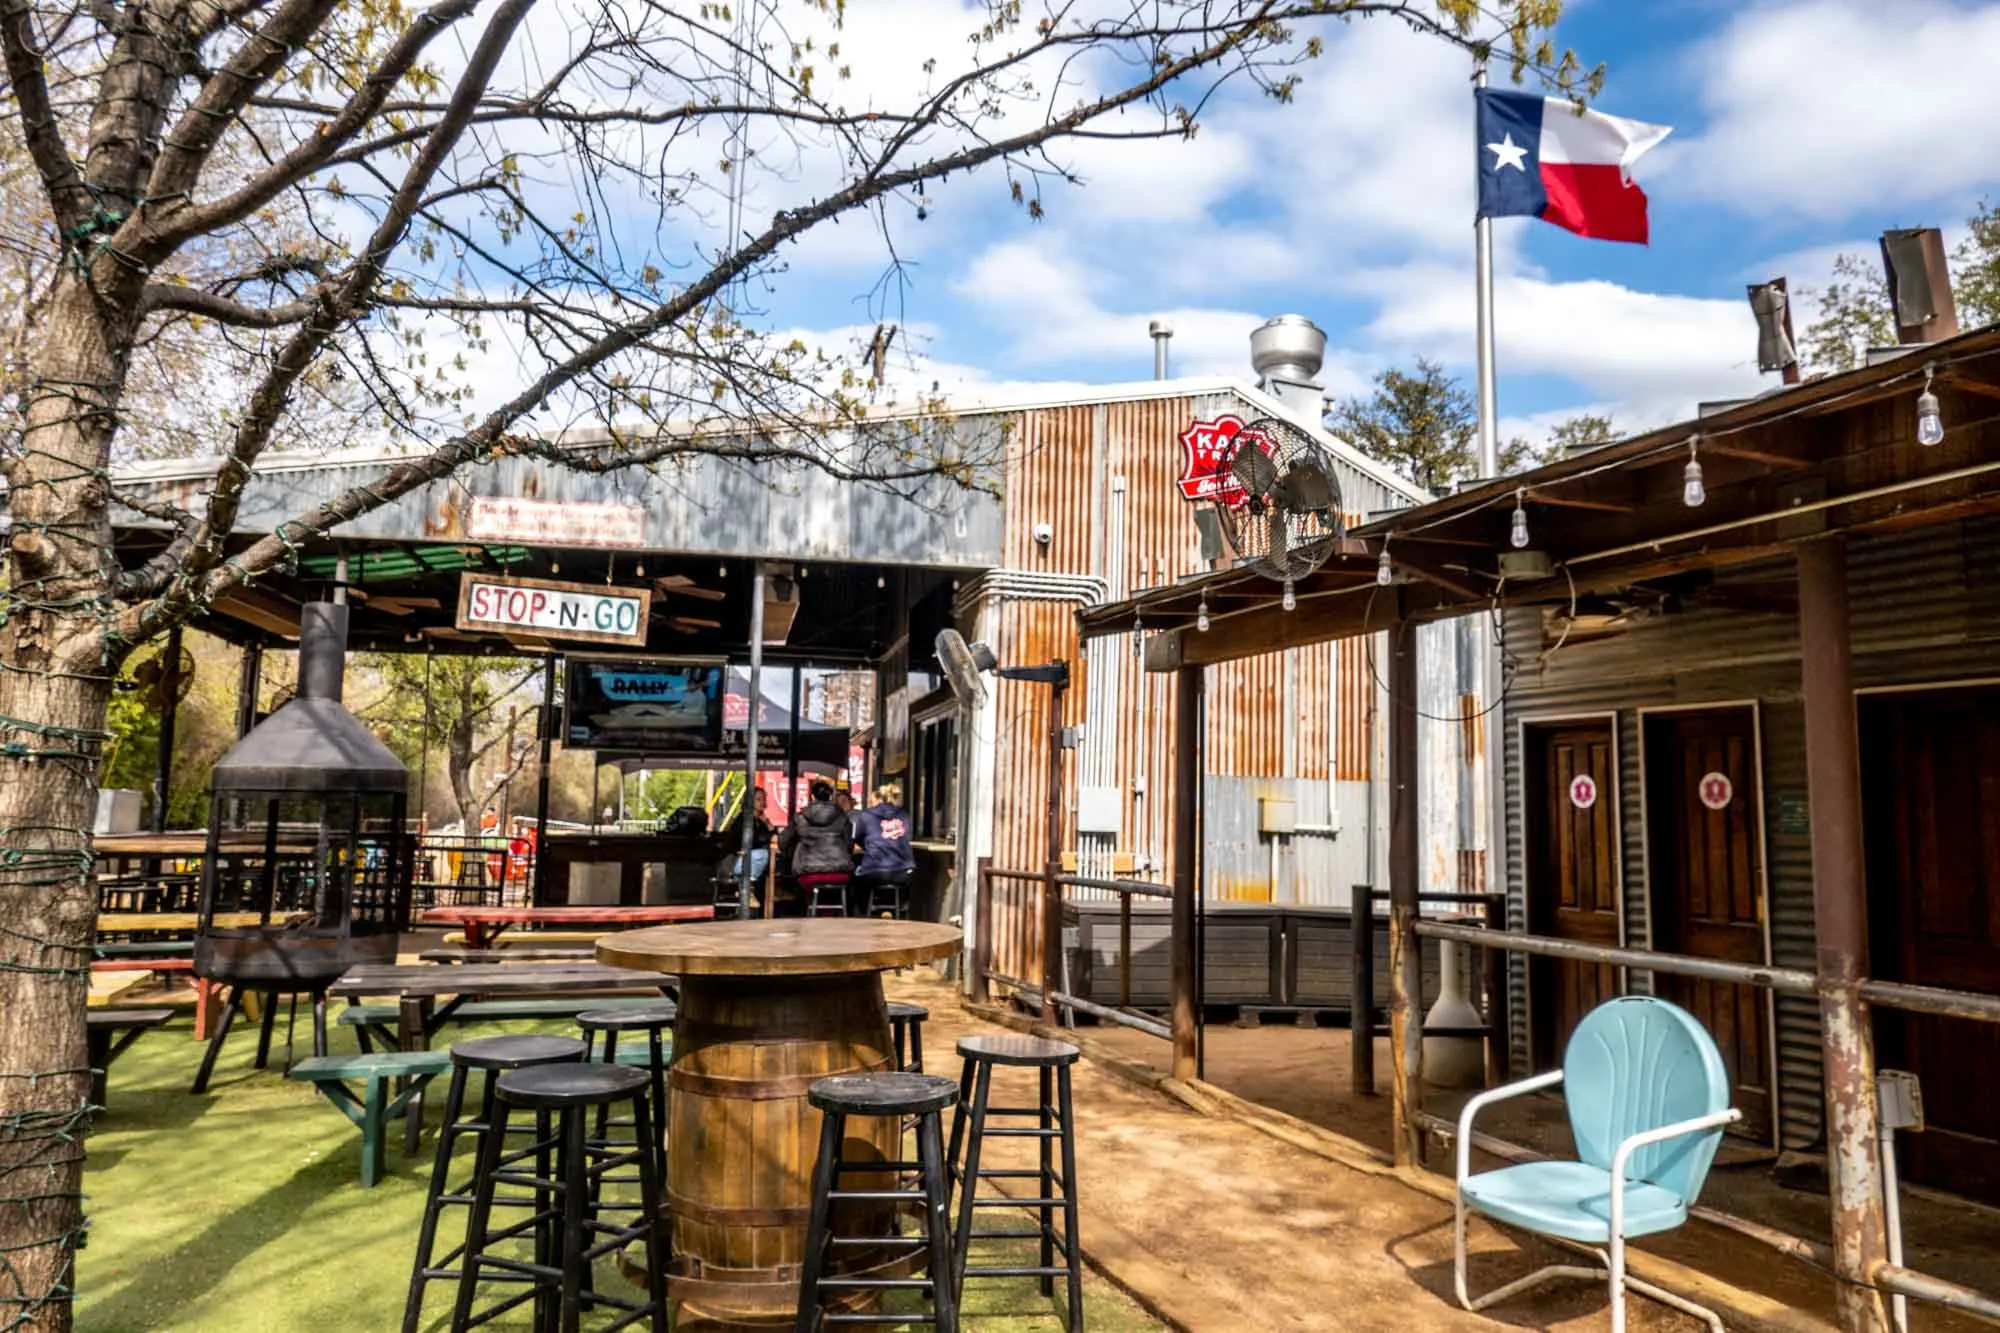 Outdoor seating at a beer garden and a Texas flag blowing in the wind